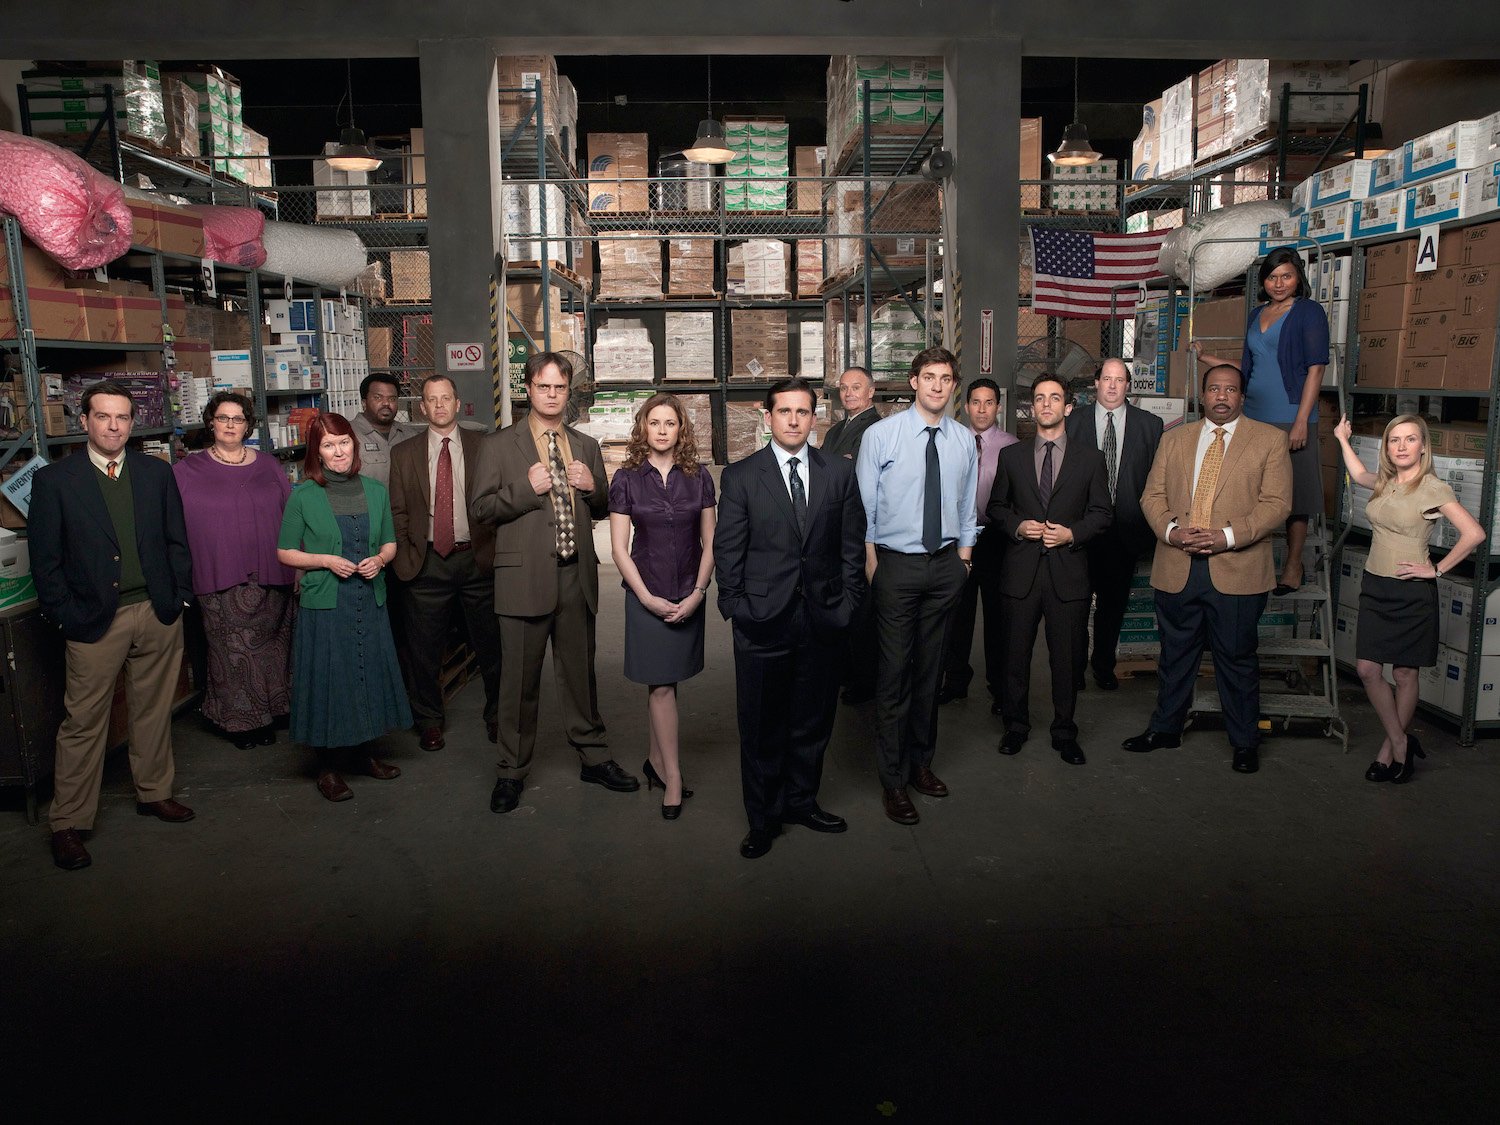 The Office': The 1 Surprising Thing Everyone in the Cast Had in Common,  According to Rainn Wilson